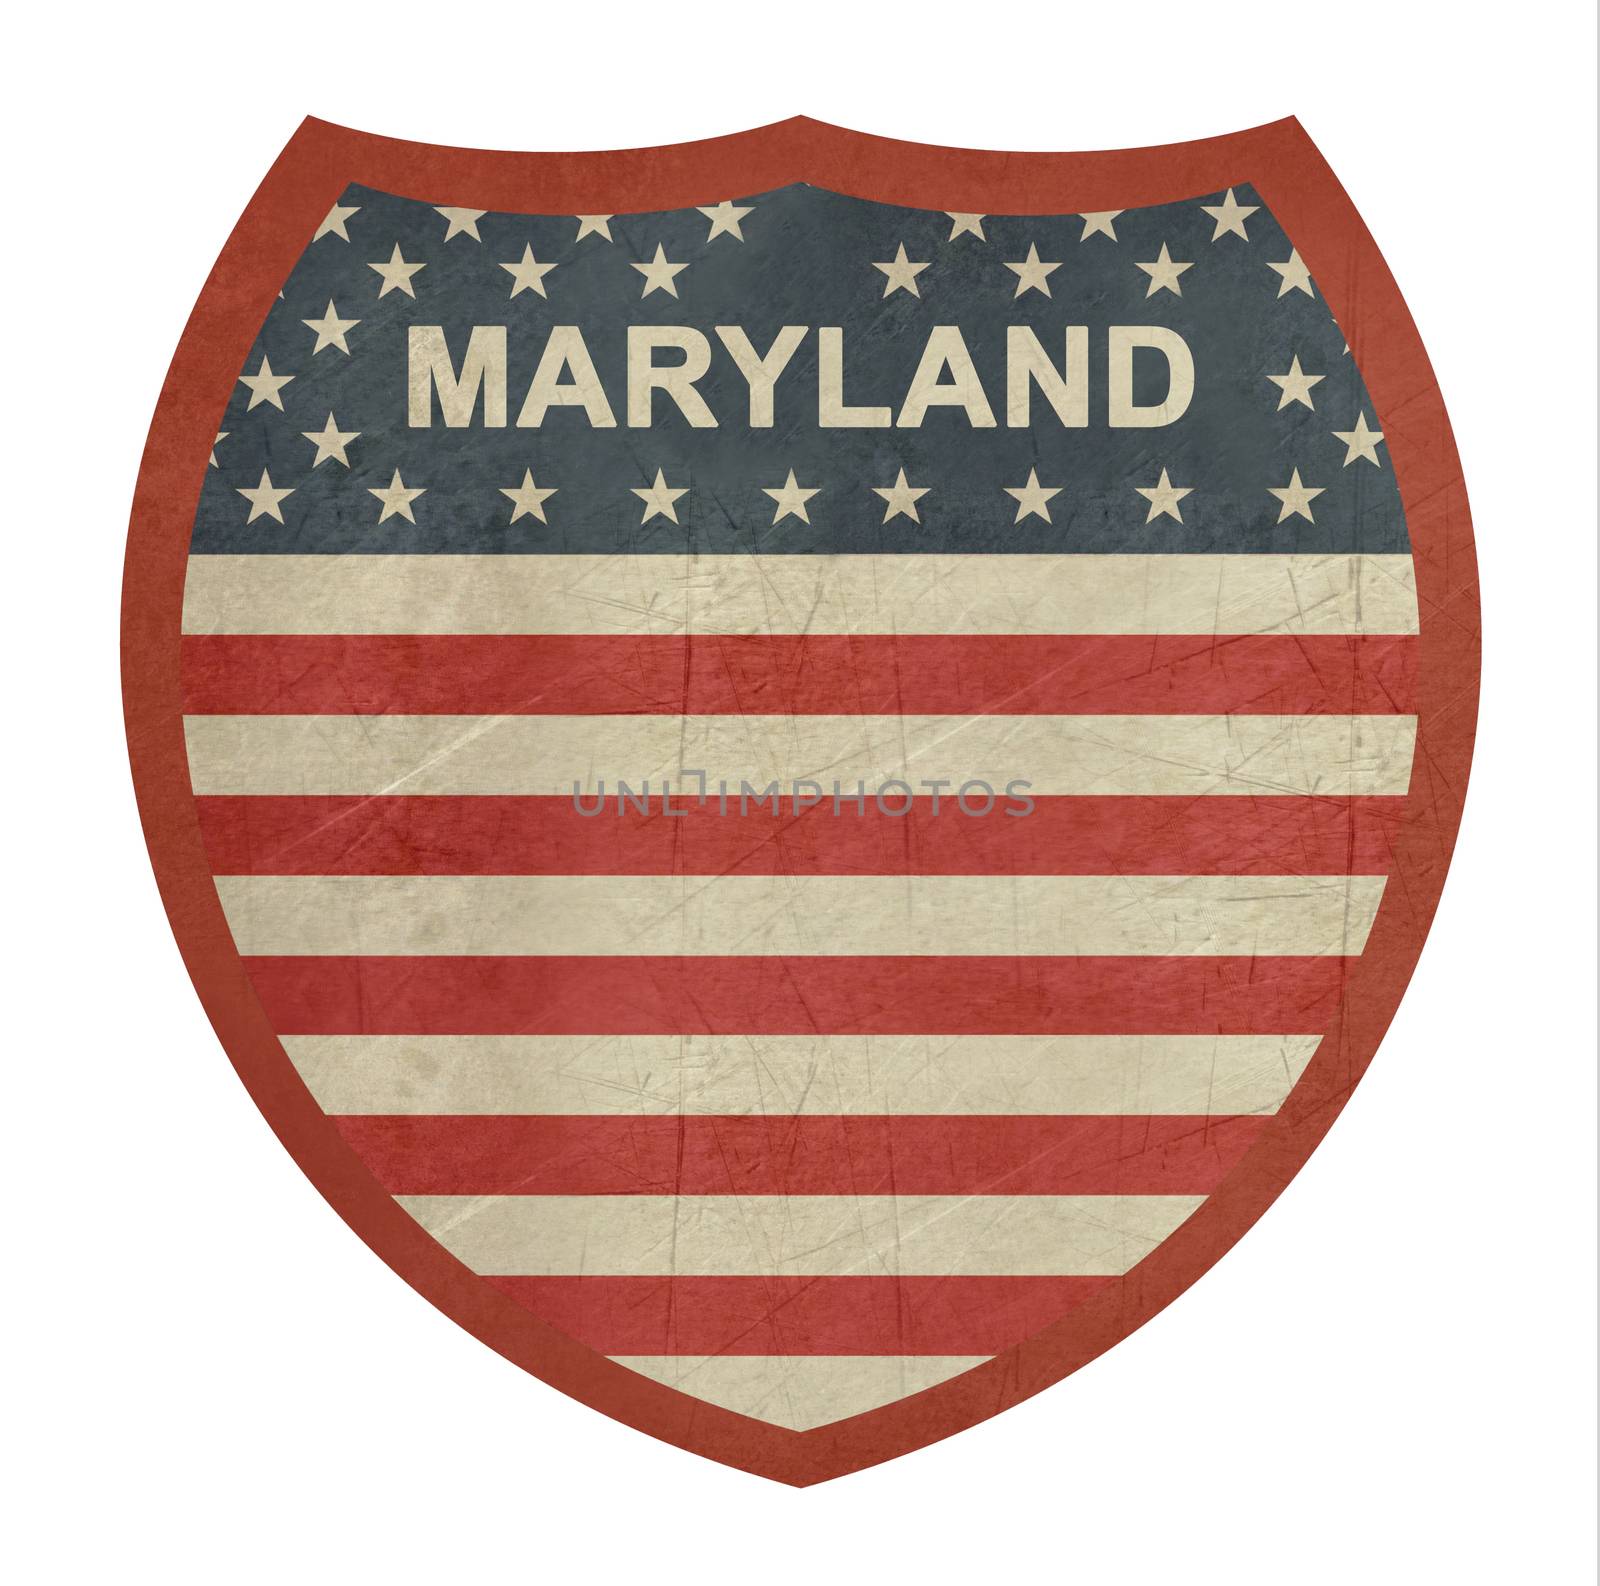 Grunge Maryland American interstate highway sign isolated on a white background.